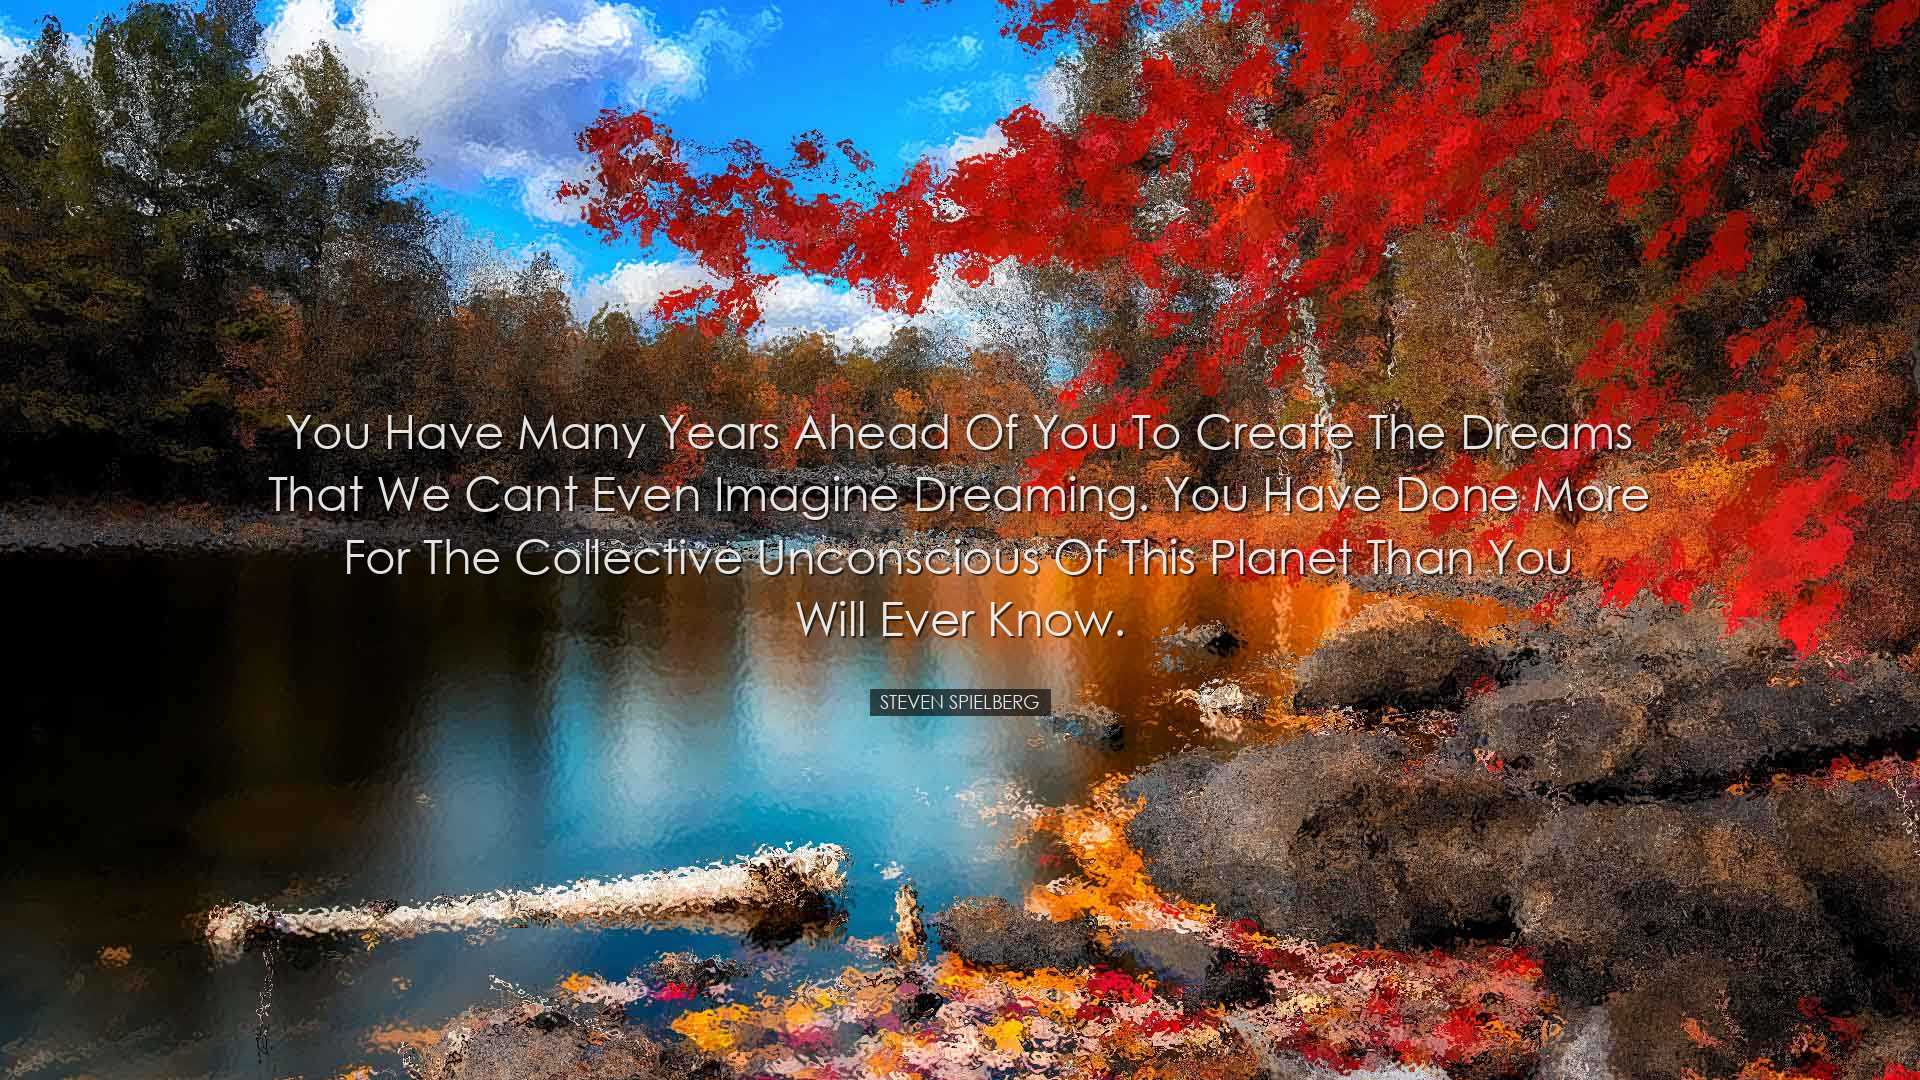 You have many years ahead of you to create the dreams that we cant